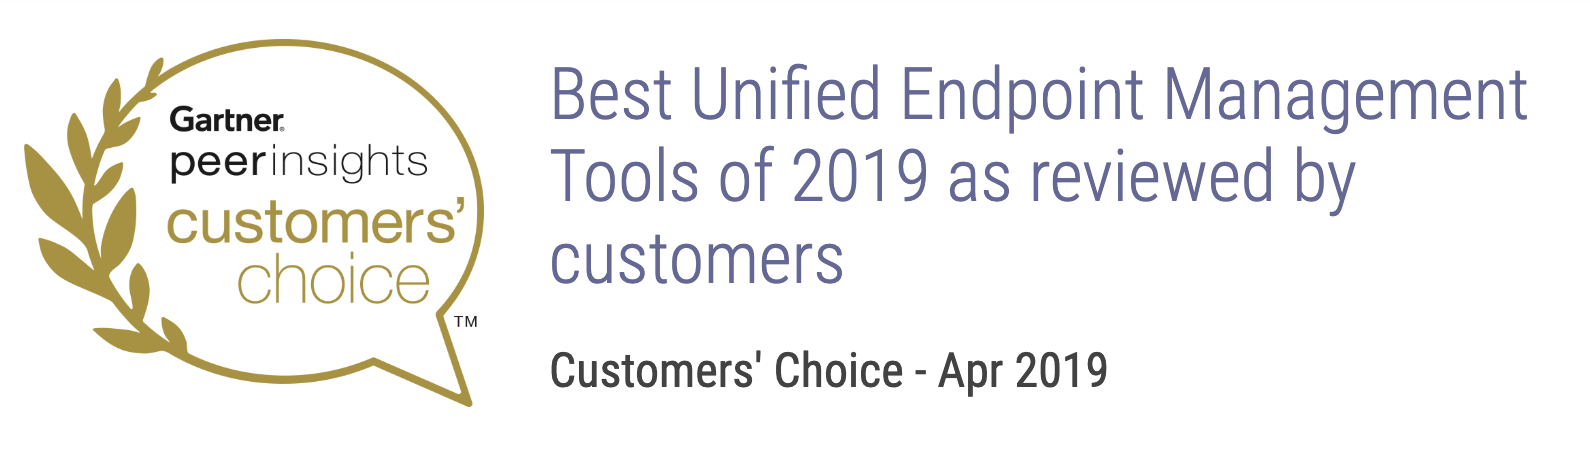 Best Unified Endpoint Management Tools of 2019 as reviewed by customers | Customers' Choice - Apr 2019